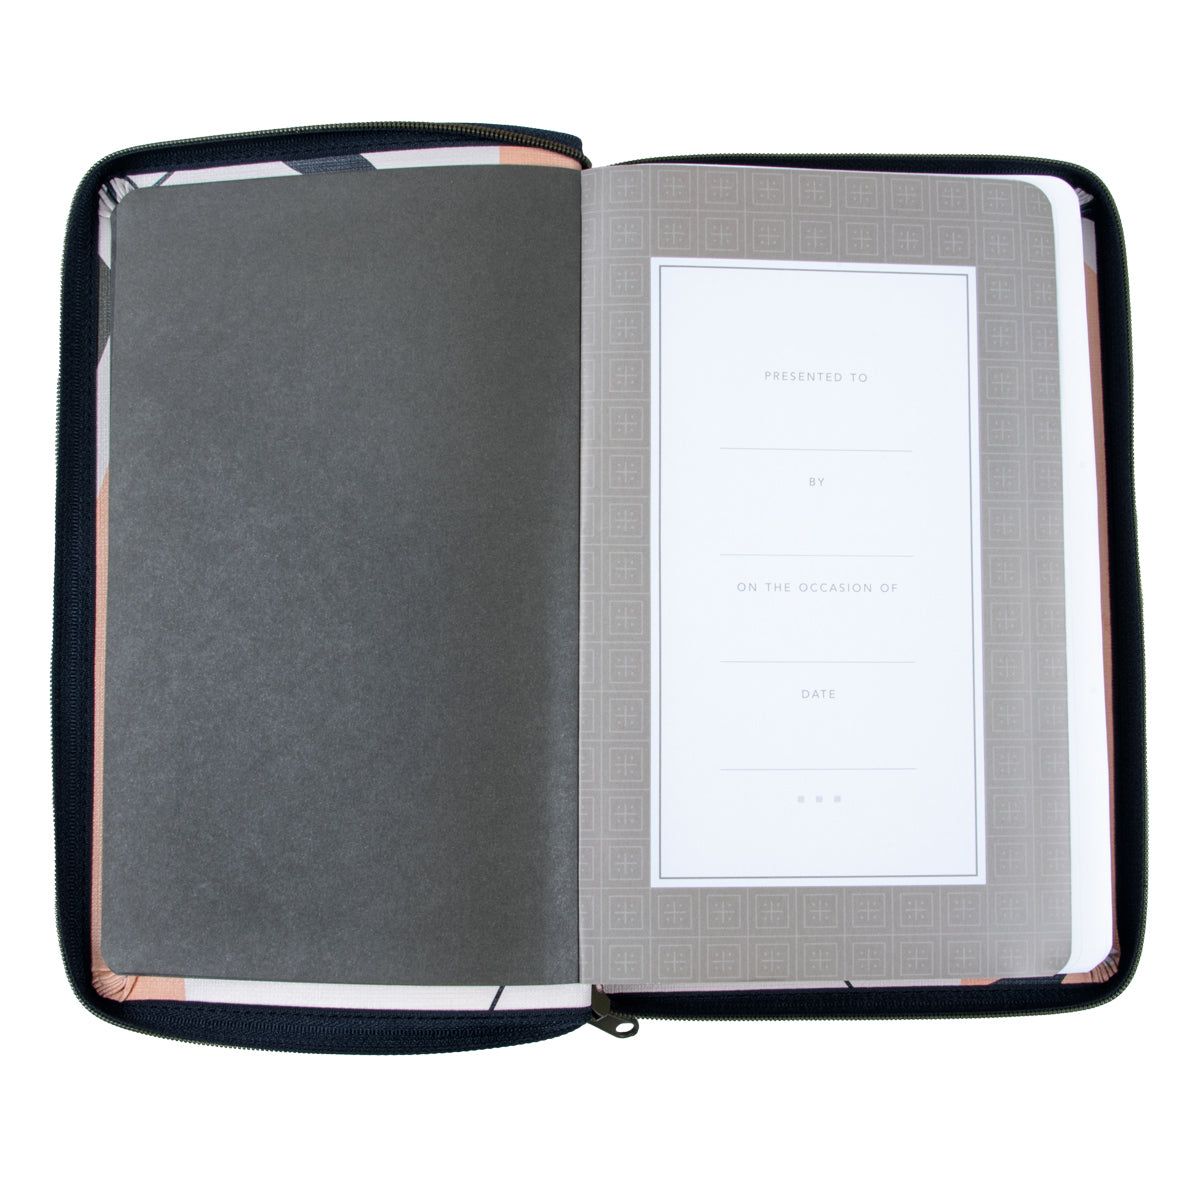 NLT Filament Thinline Reference Bible, Sunset Branches With Zip (Imitation Leather)